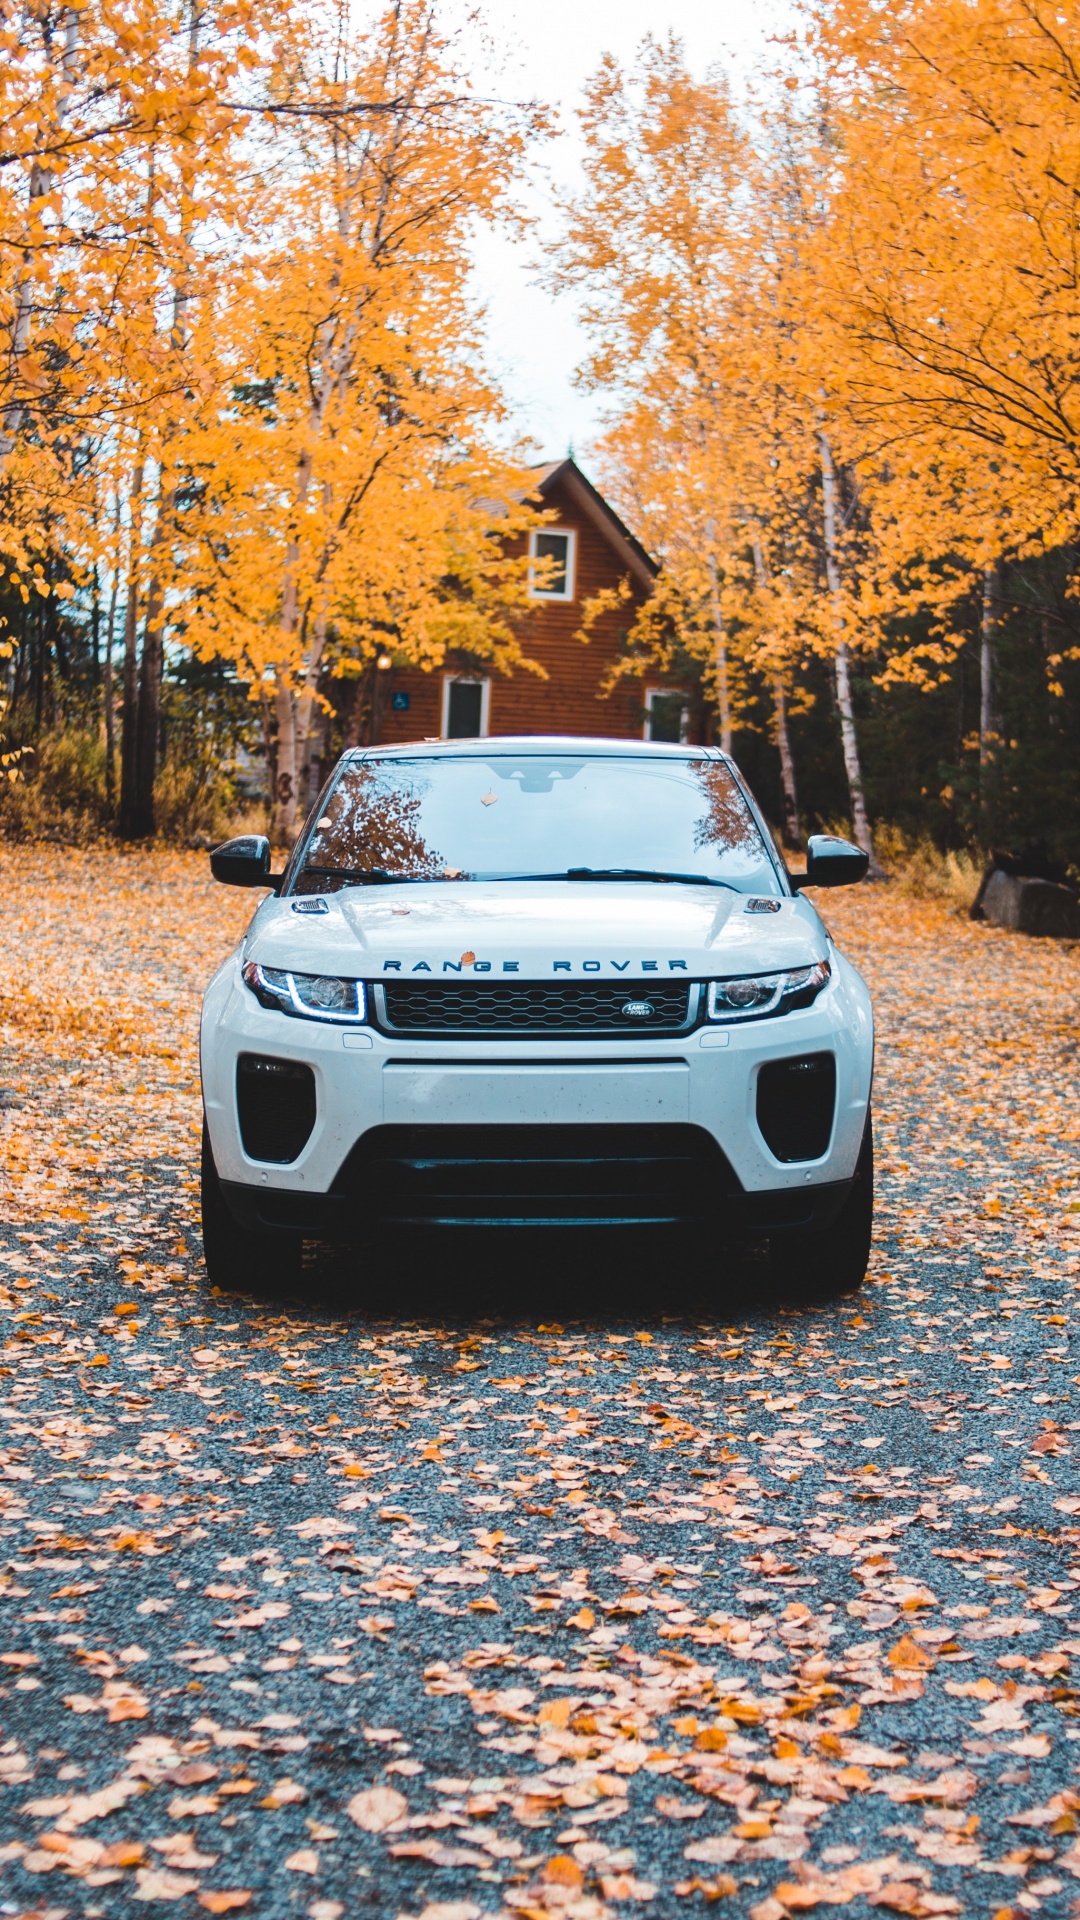 White Car Parked on Brown Dried Leaves on Ground During Daytime. Wallpaper in 1080x1920 Resolution